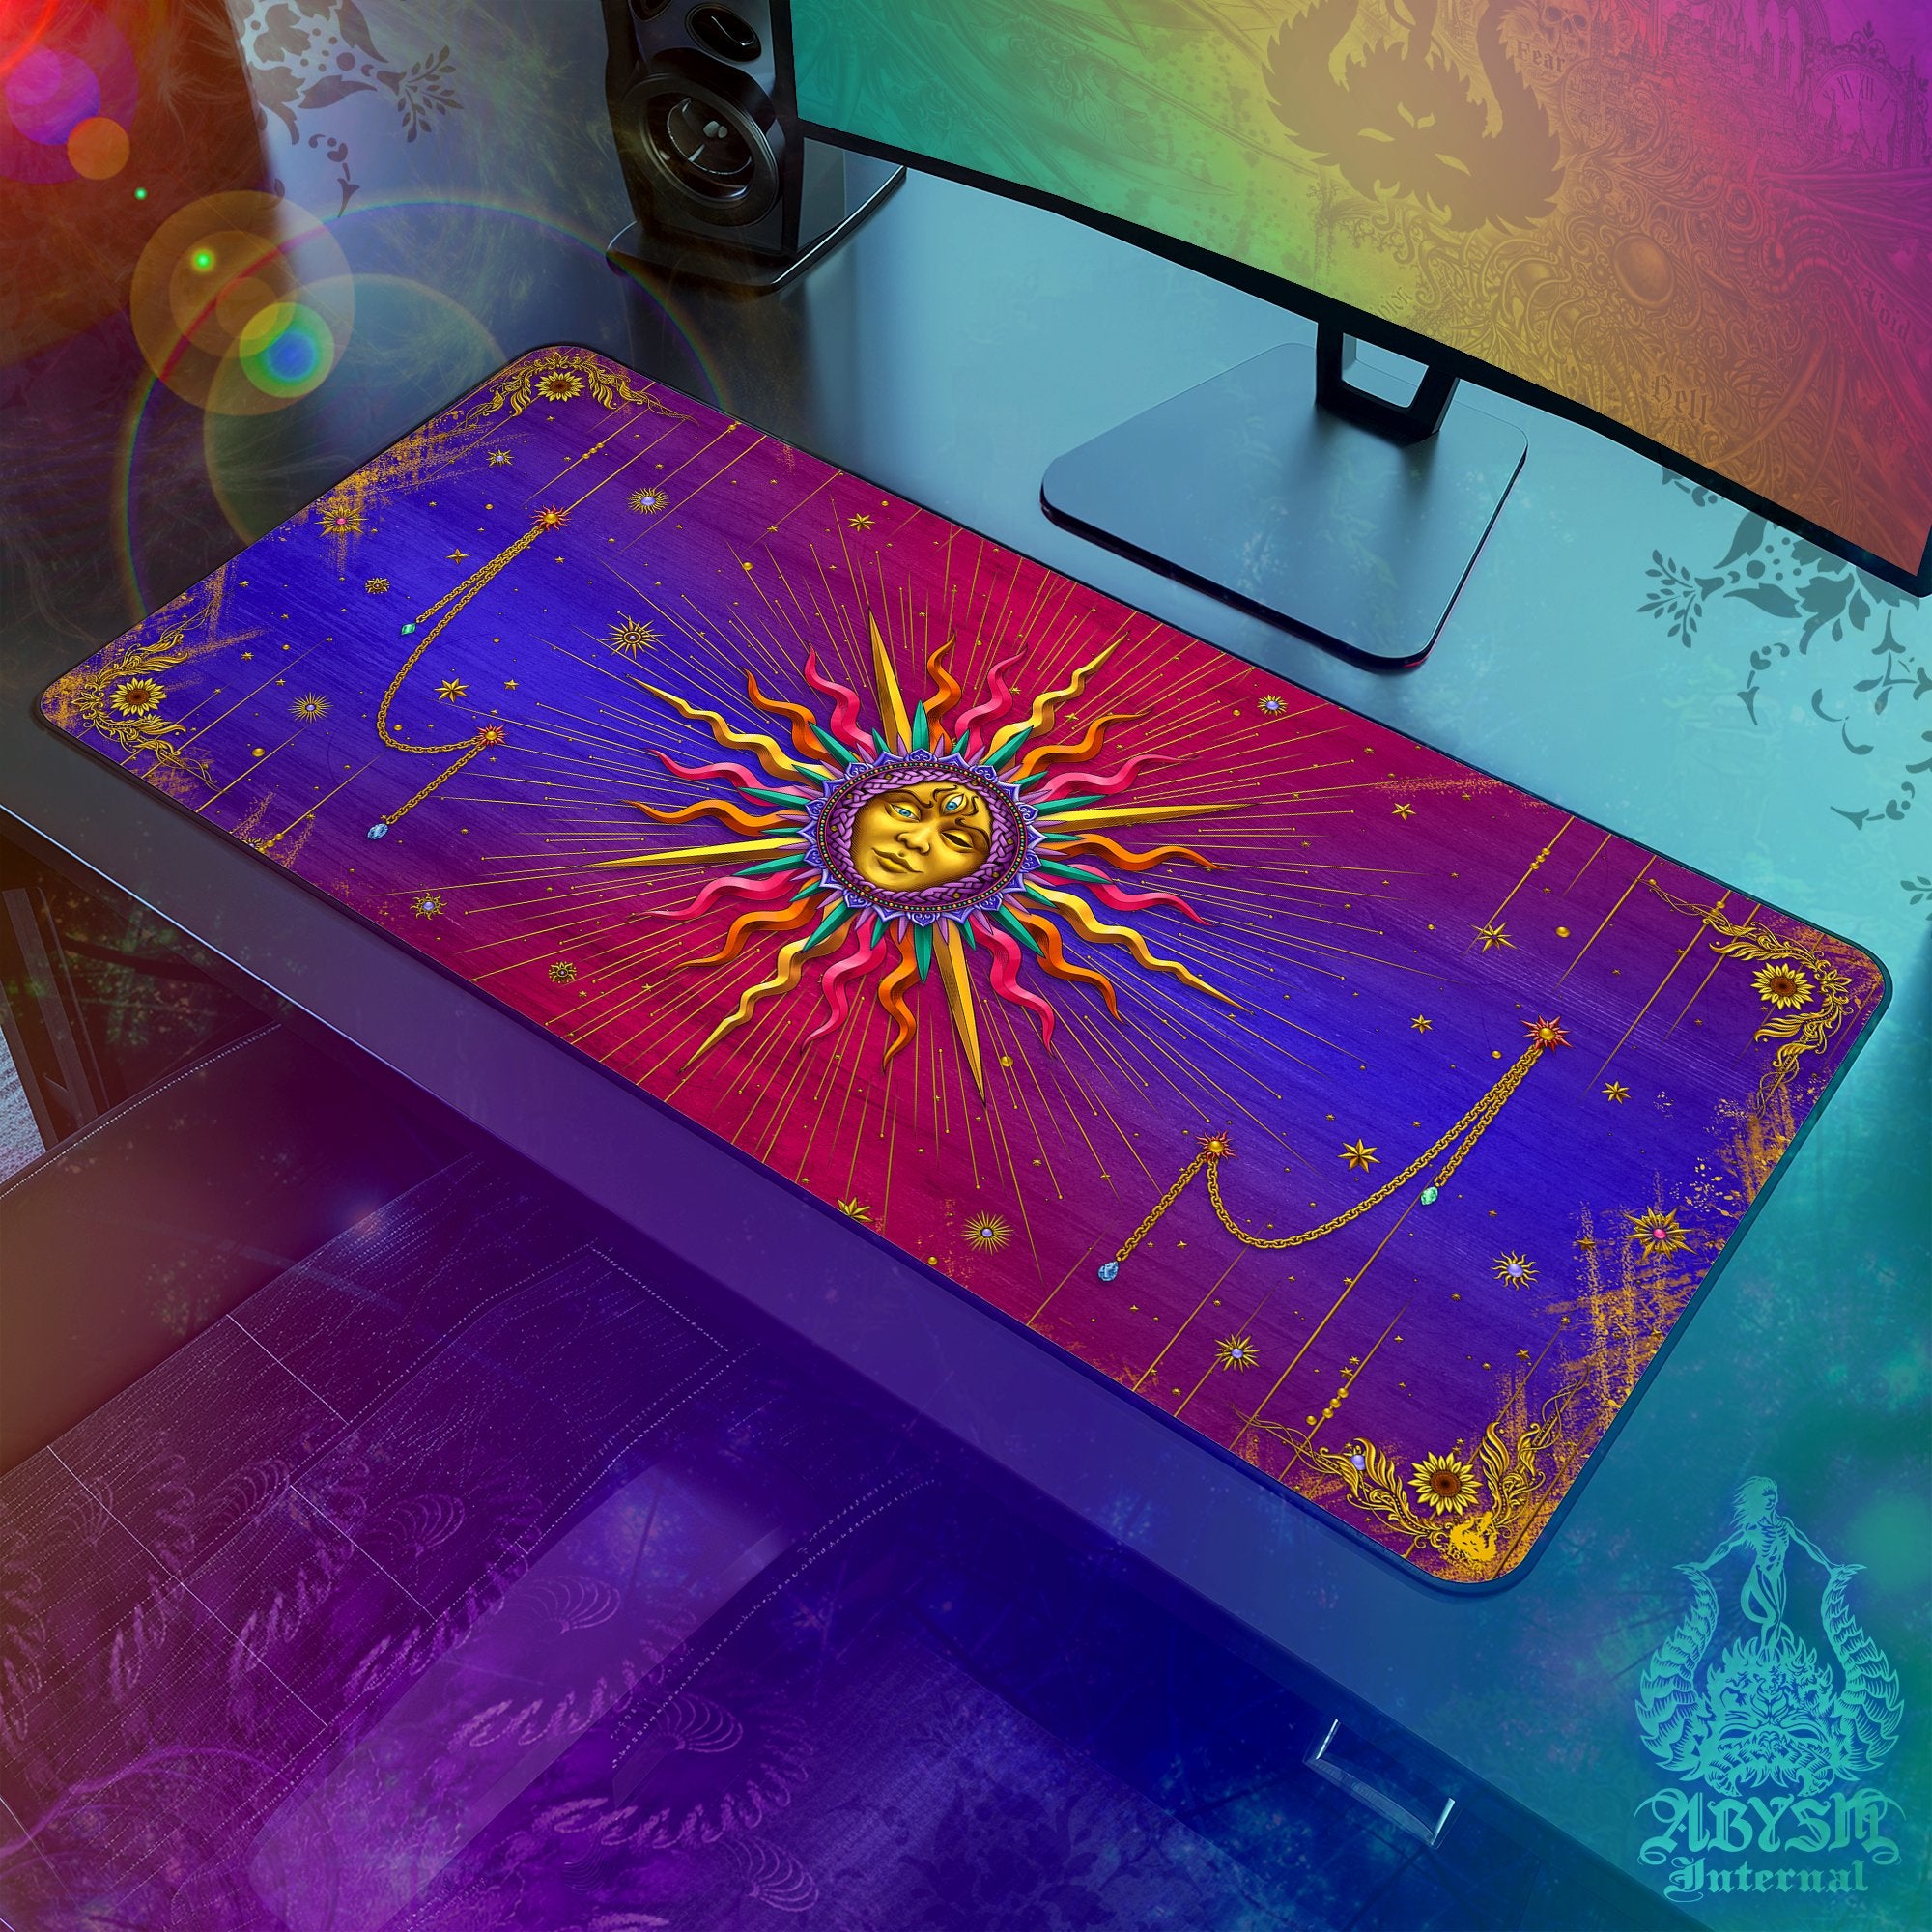 Tarot Arcana Desk Mat, Sun Gaming Mouse Pad, Witchy Table Protector Cover, Colorful Witch Workpad, Esoteric Art Print - Psy - Abysm Internal